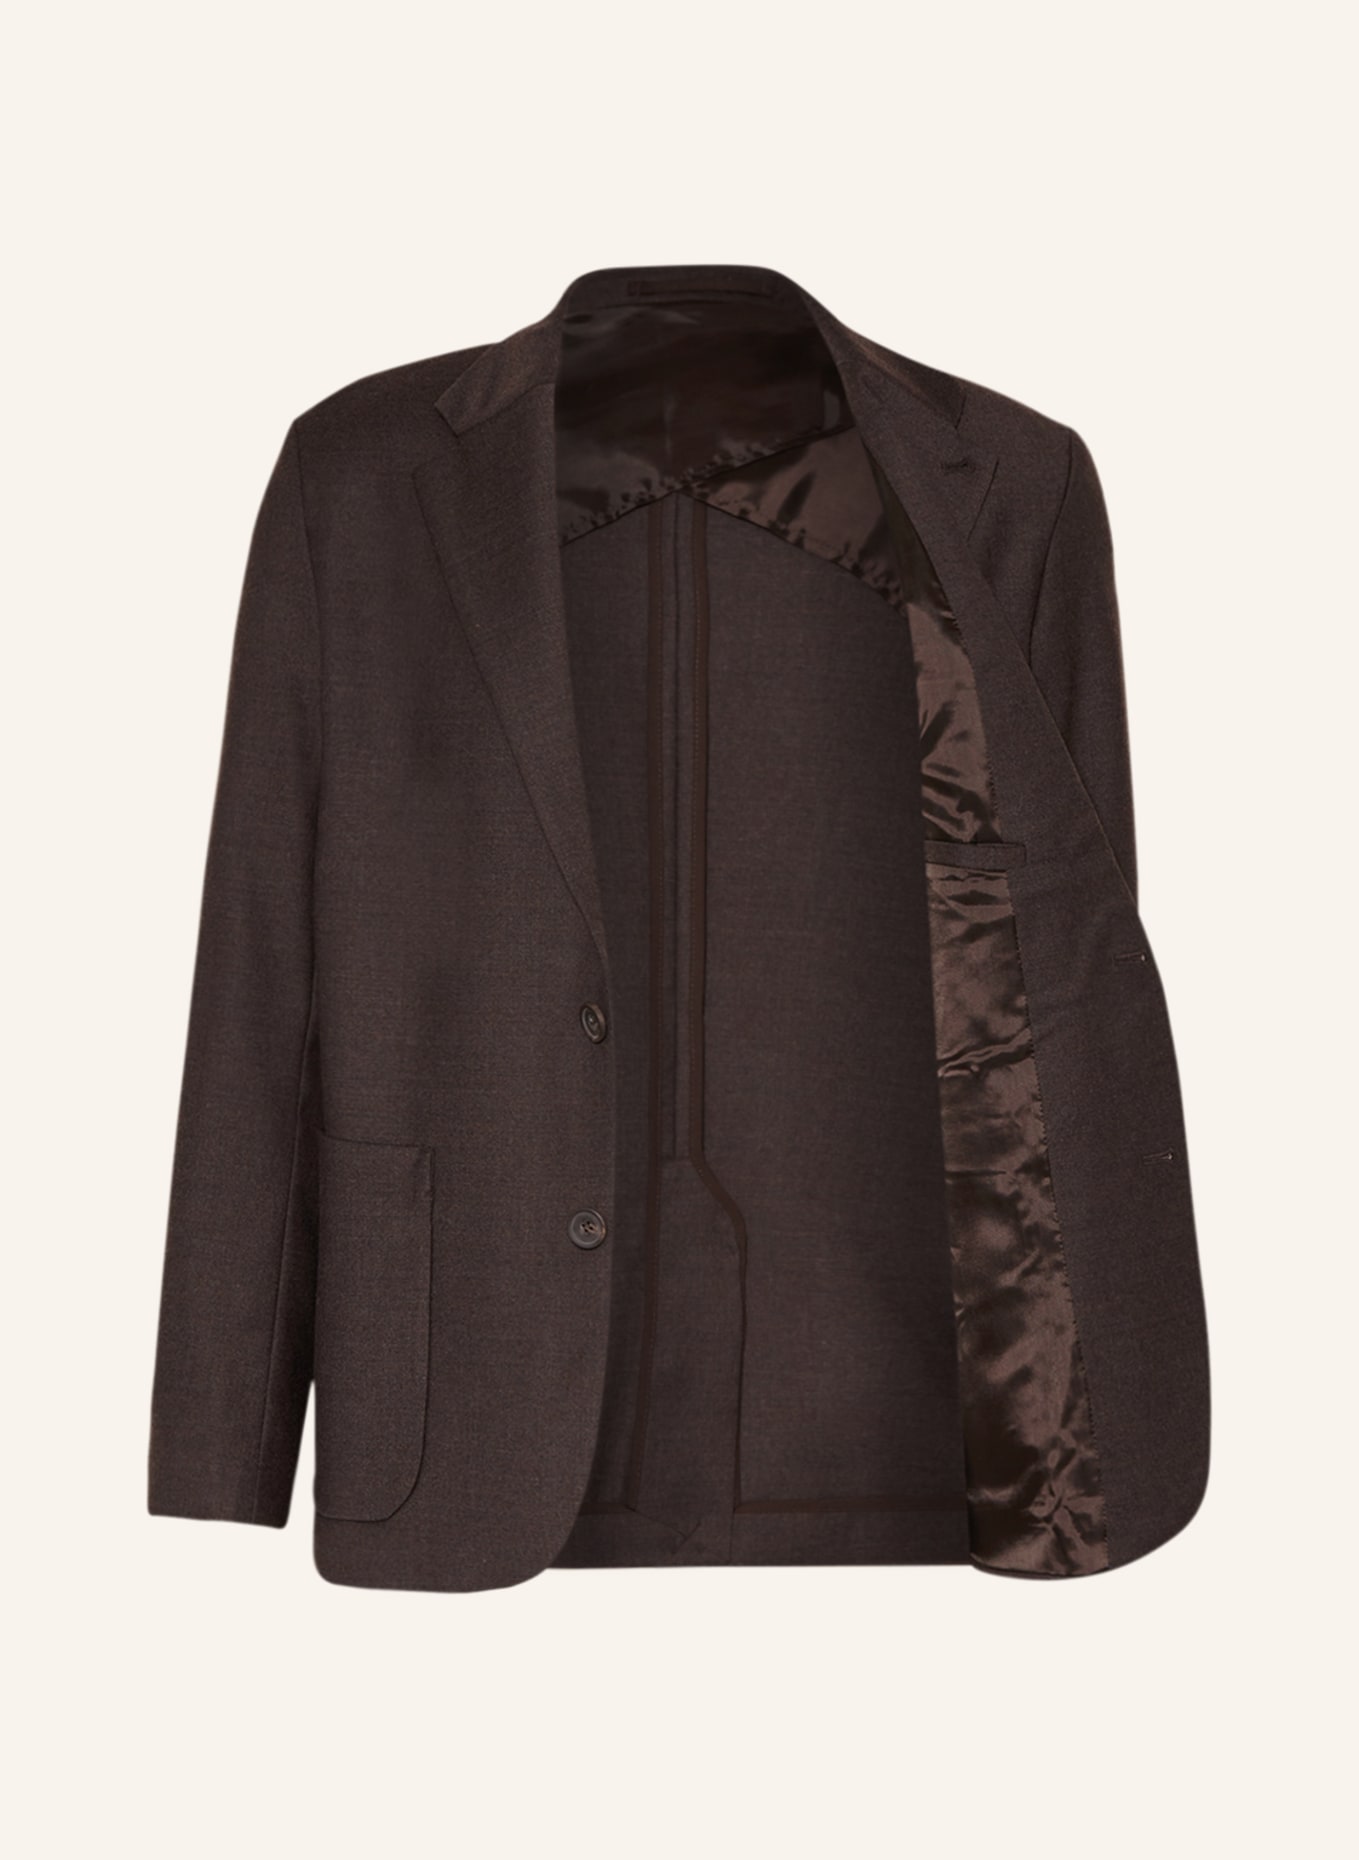 COS Tailored jacket regular fit, Color: BROWN (Image 4)